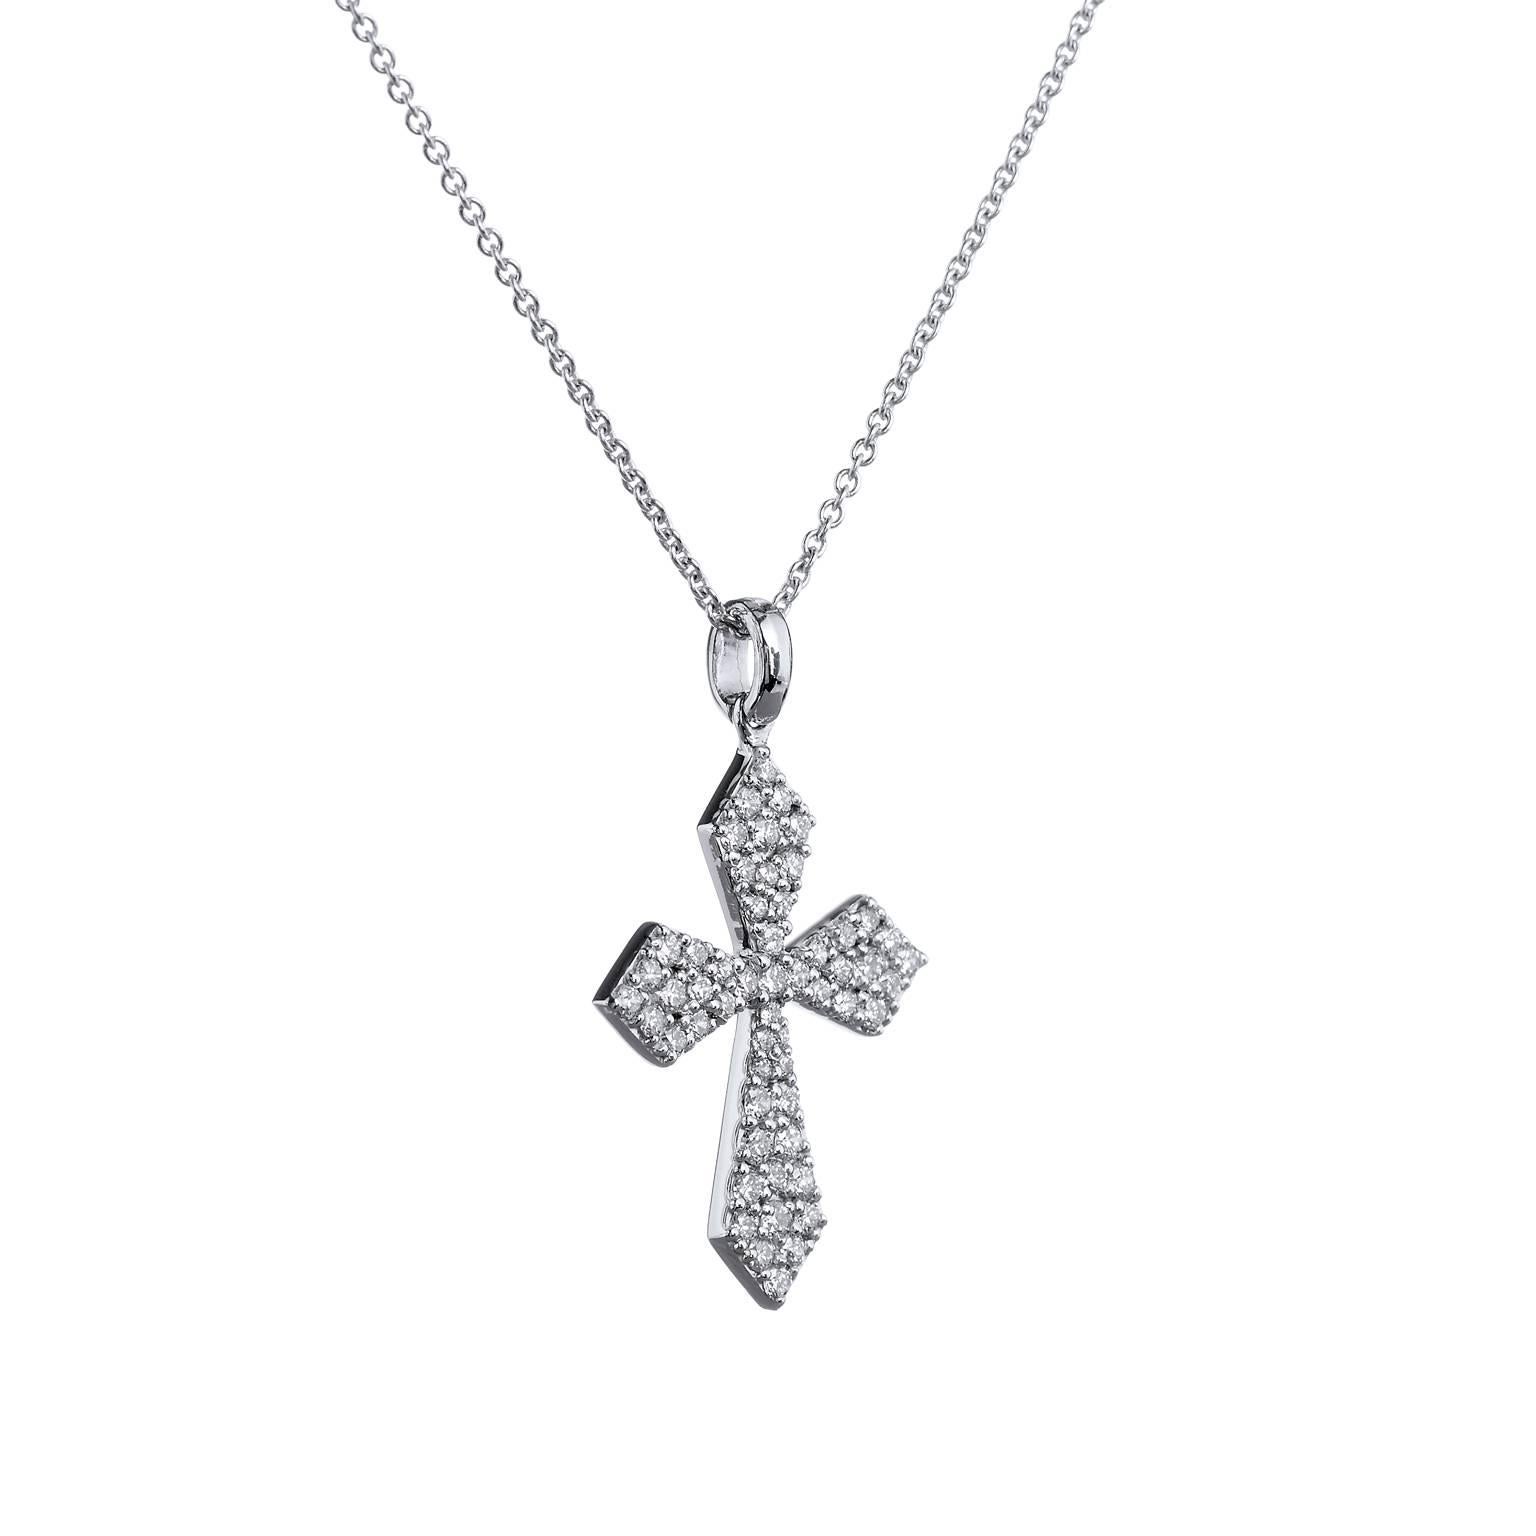 Diamond Pave 18 karat White Gold Cross Pendant

Crafted in 18 karat white gold, this cross pendant features .63 carat of pave set diamonds graded G SI1.

The necklace measures 17 inches, with a loop in the chain to wear it at 15.5 inches long. 